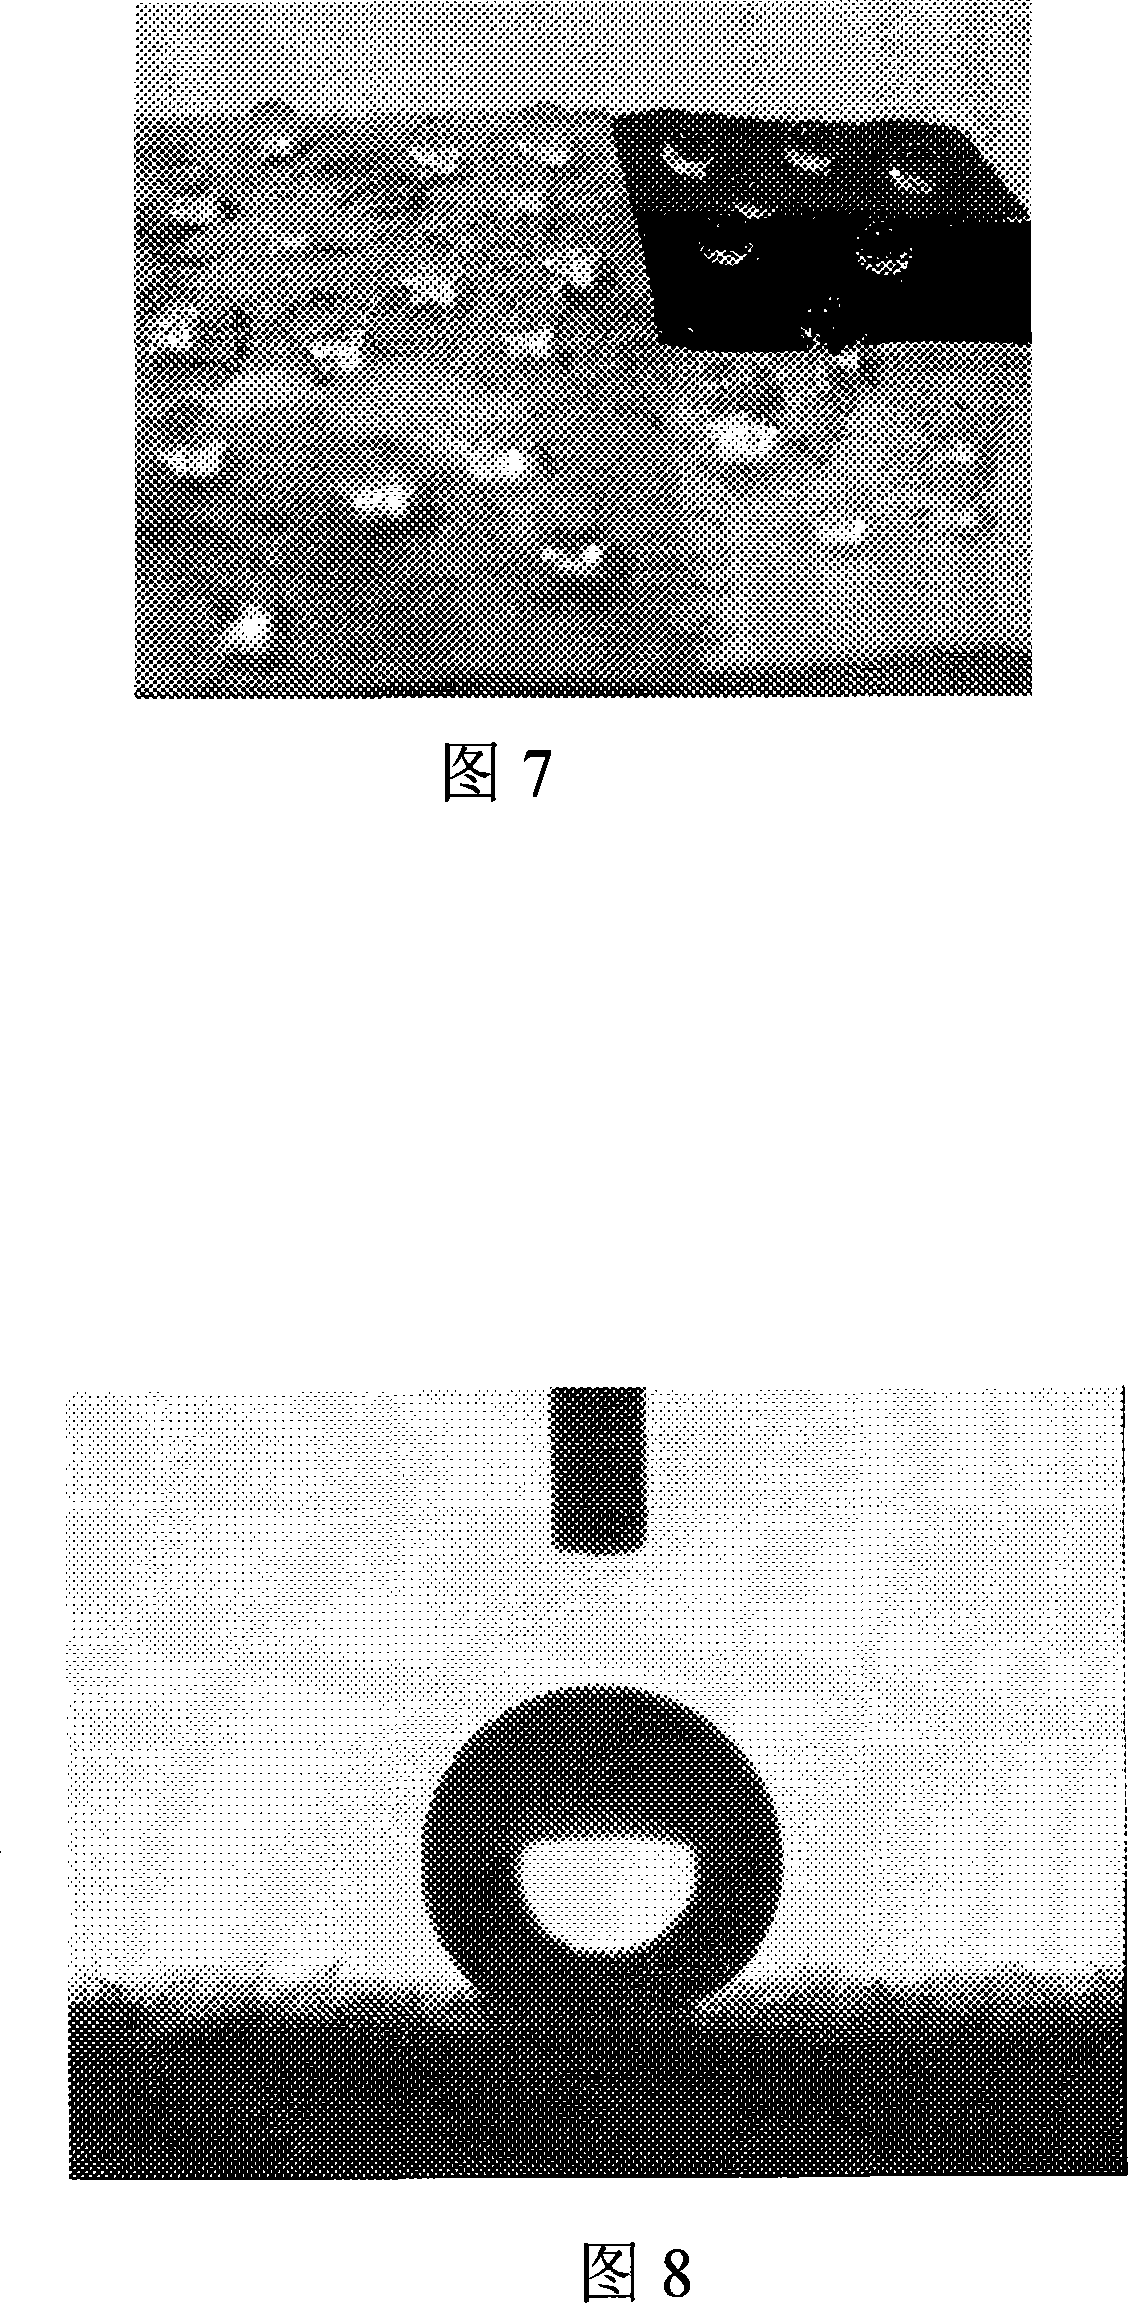 Preparation method and use for ultra-hydrophobic cotton fibrous material or ultra-hydrophobic paper fibrous material